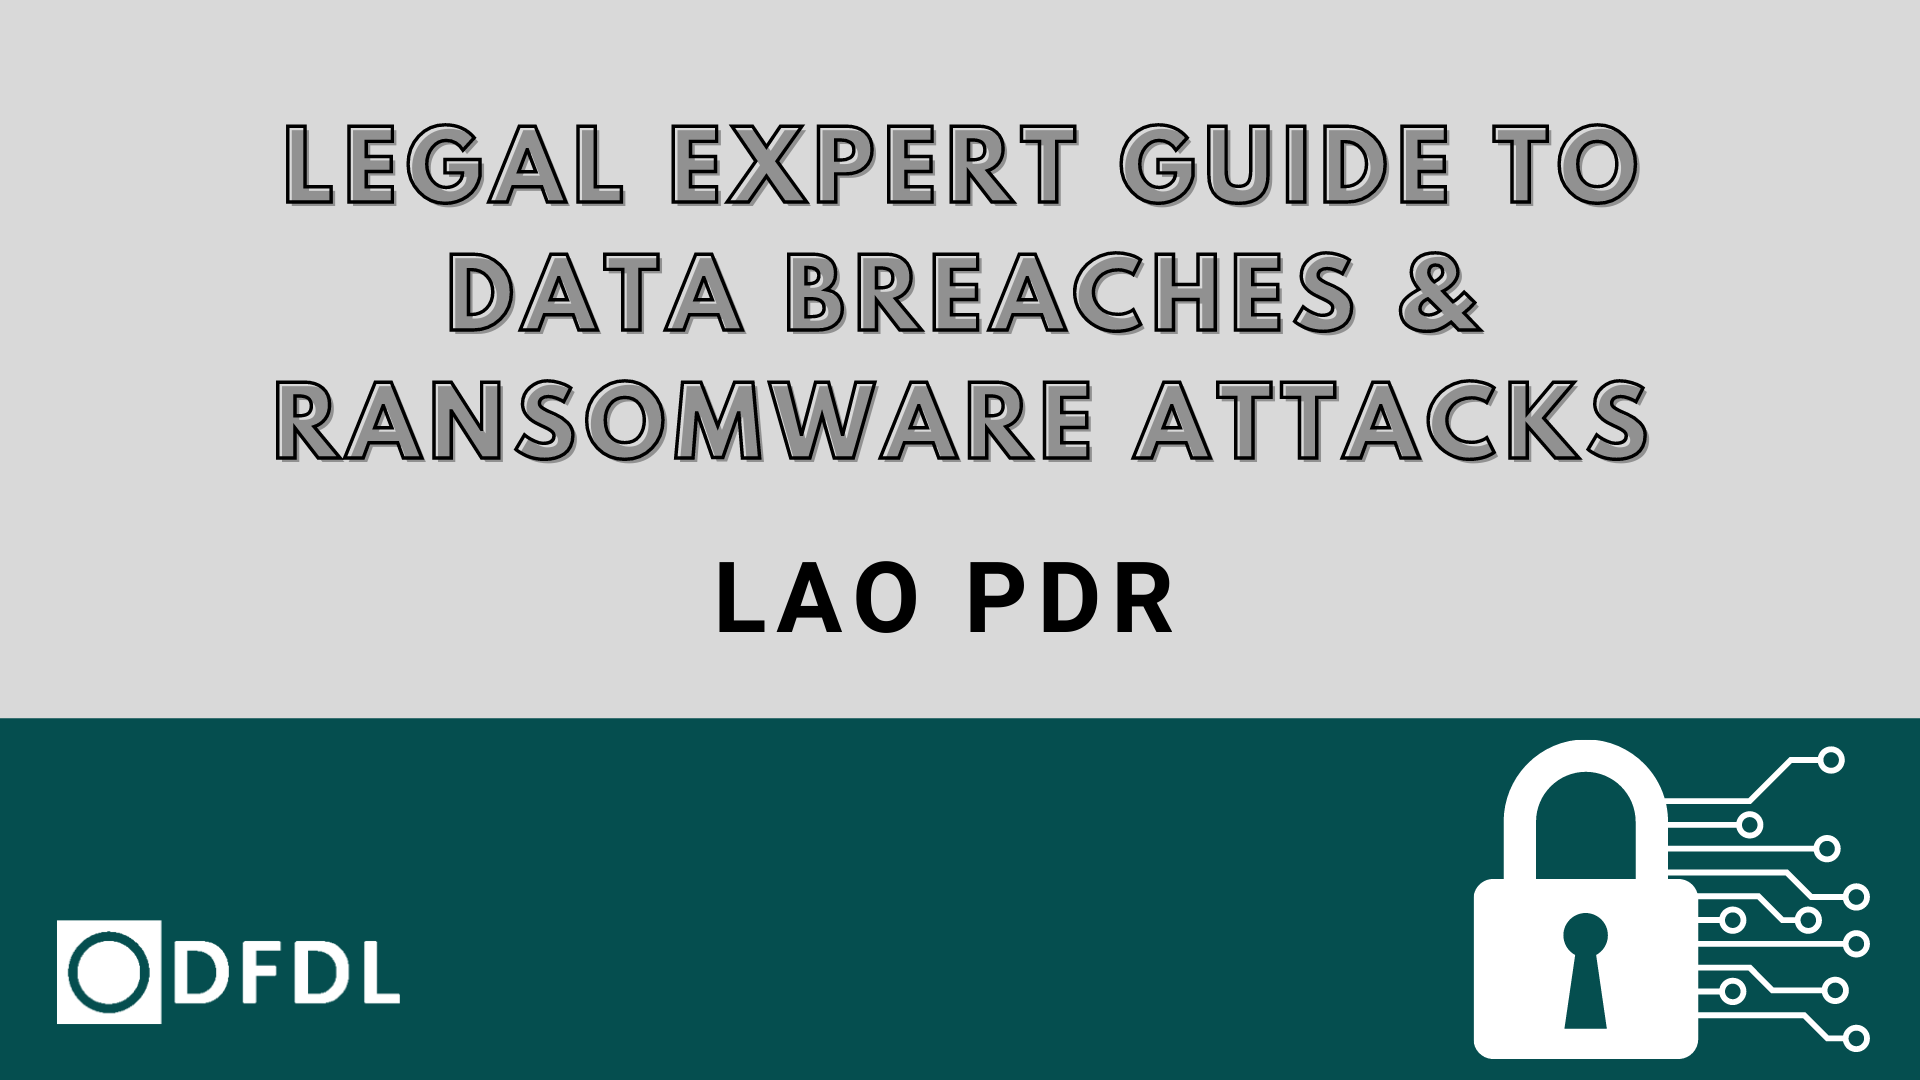 Legal Expert Guide to Data Breaches & Ransomware Attacks in the Lao PDR